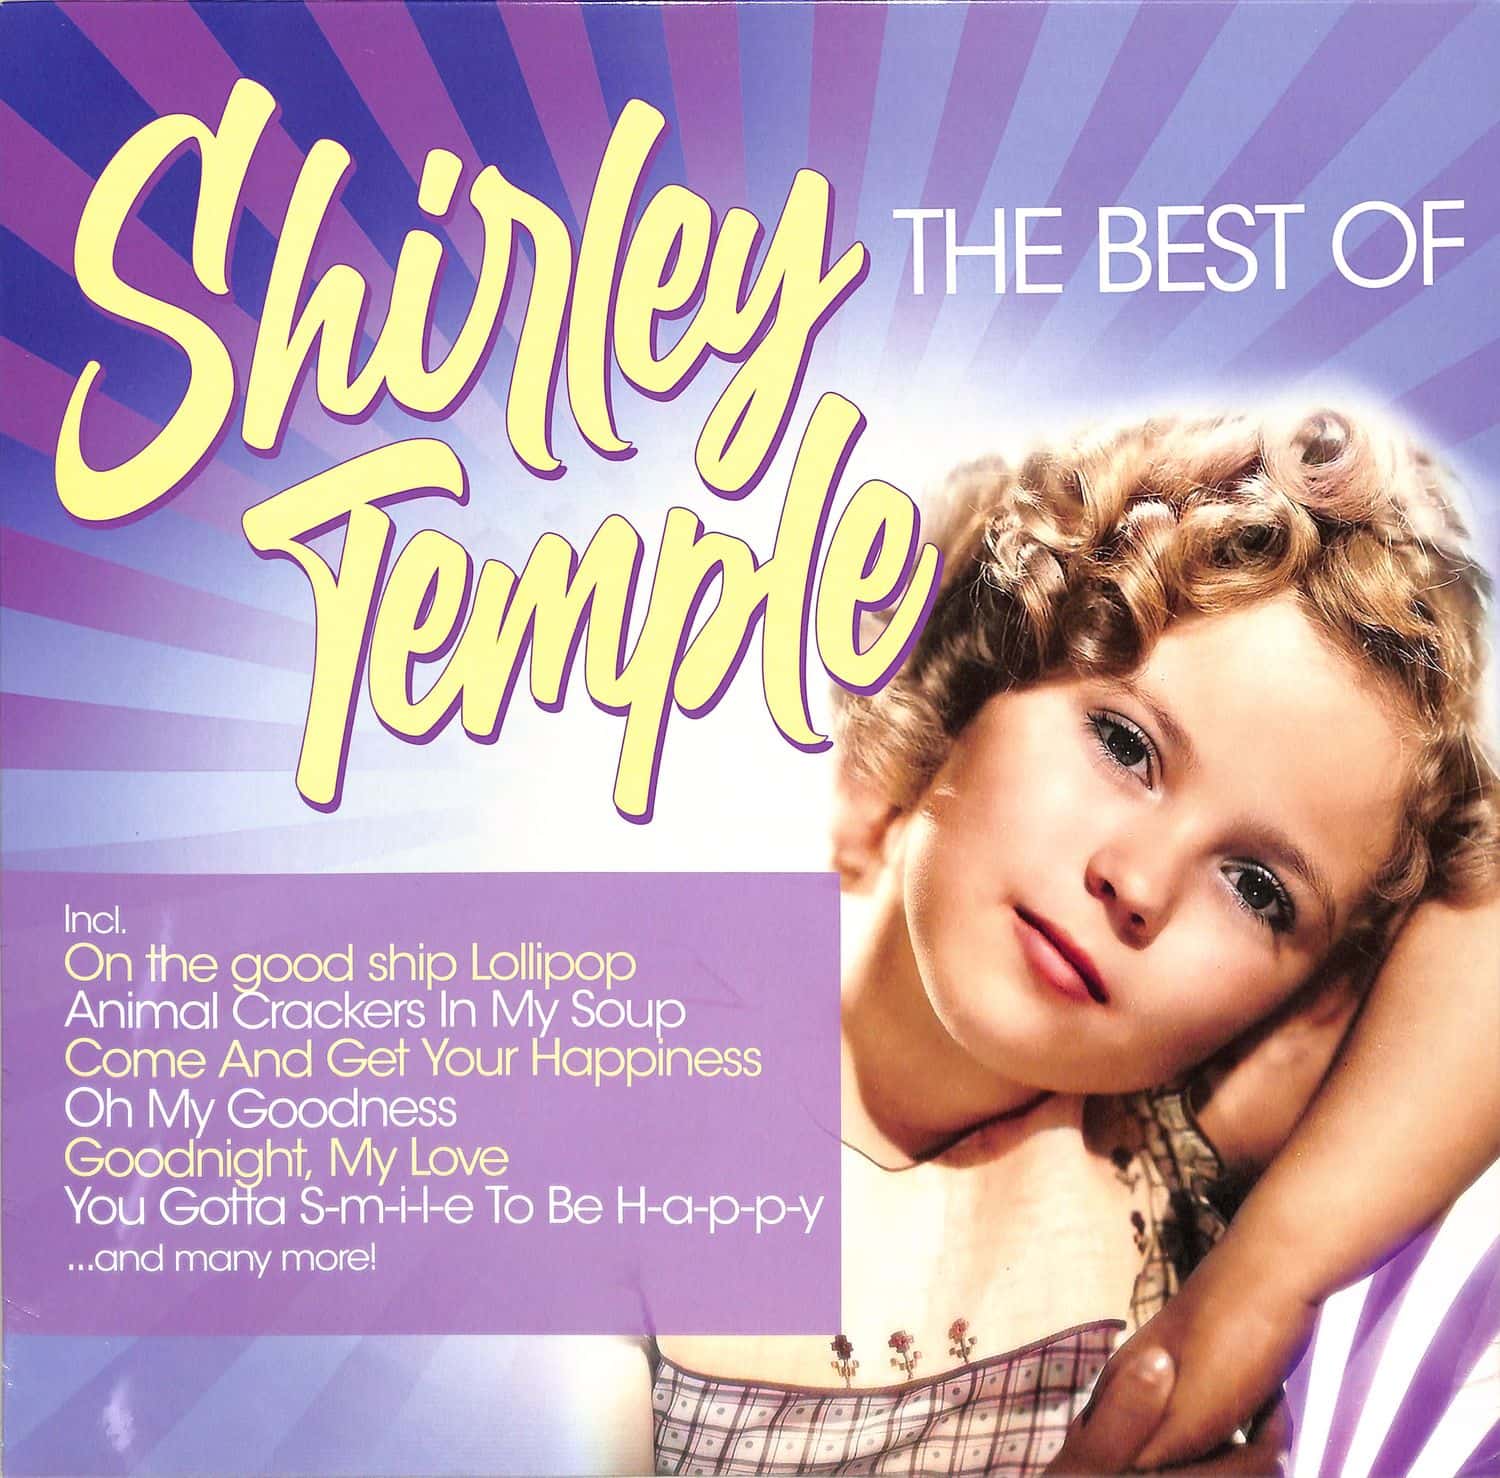 Shirley Temple - THE BEST OF 